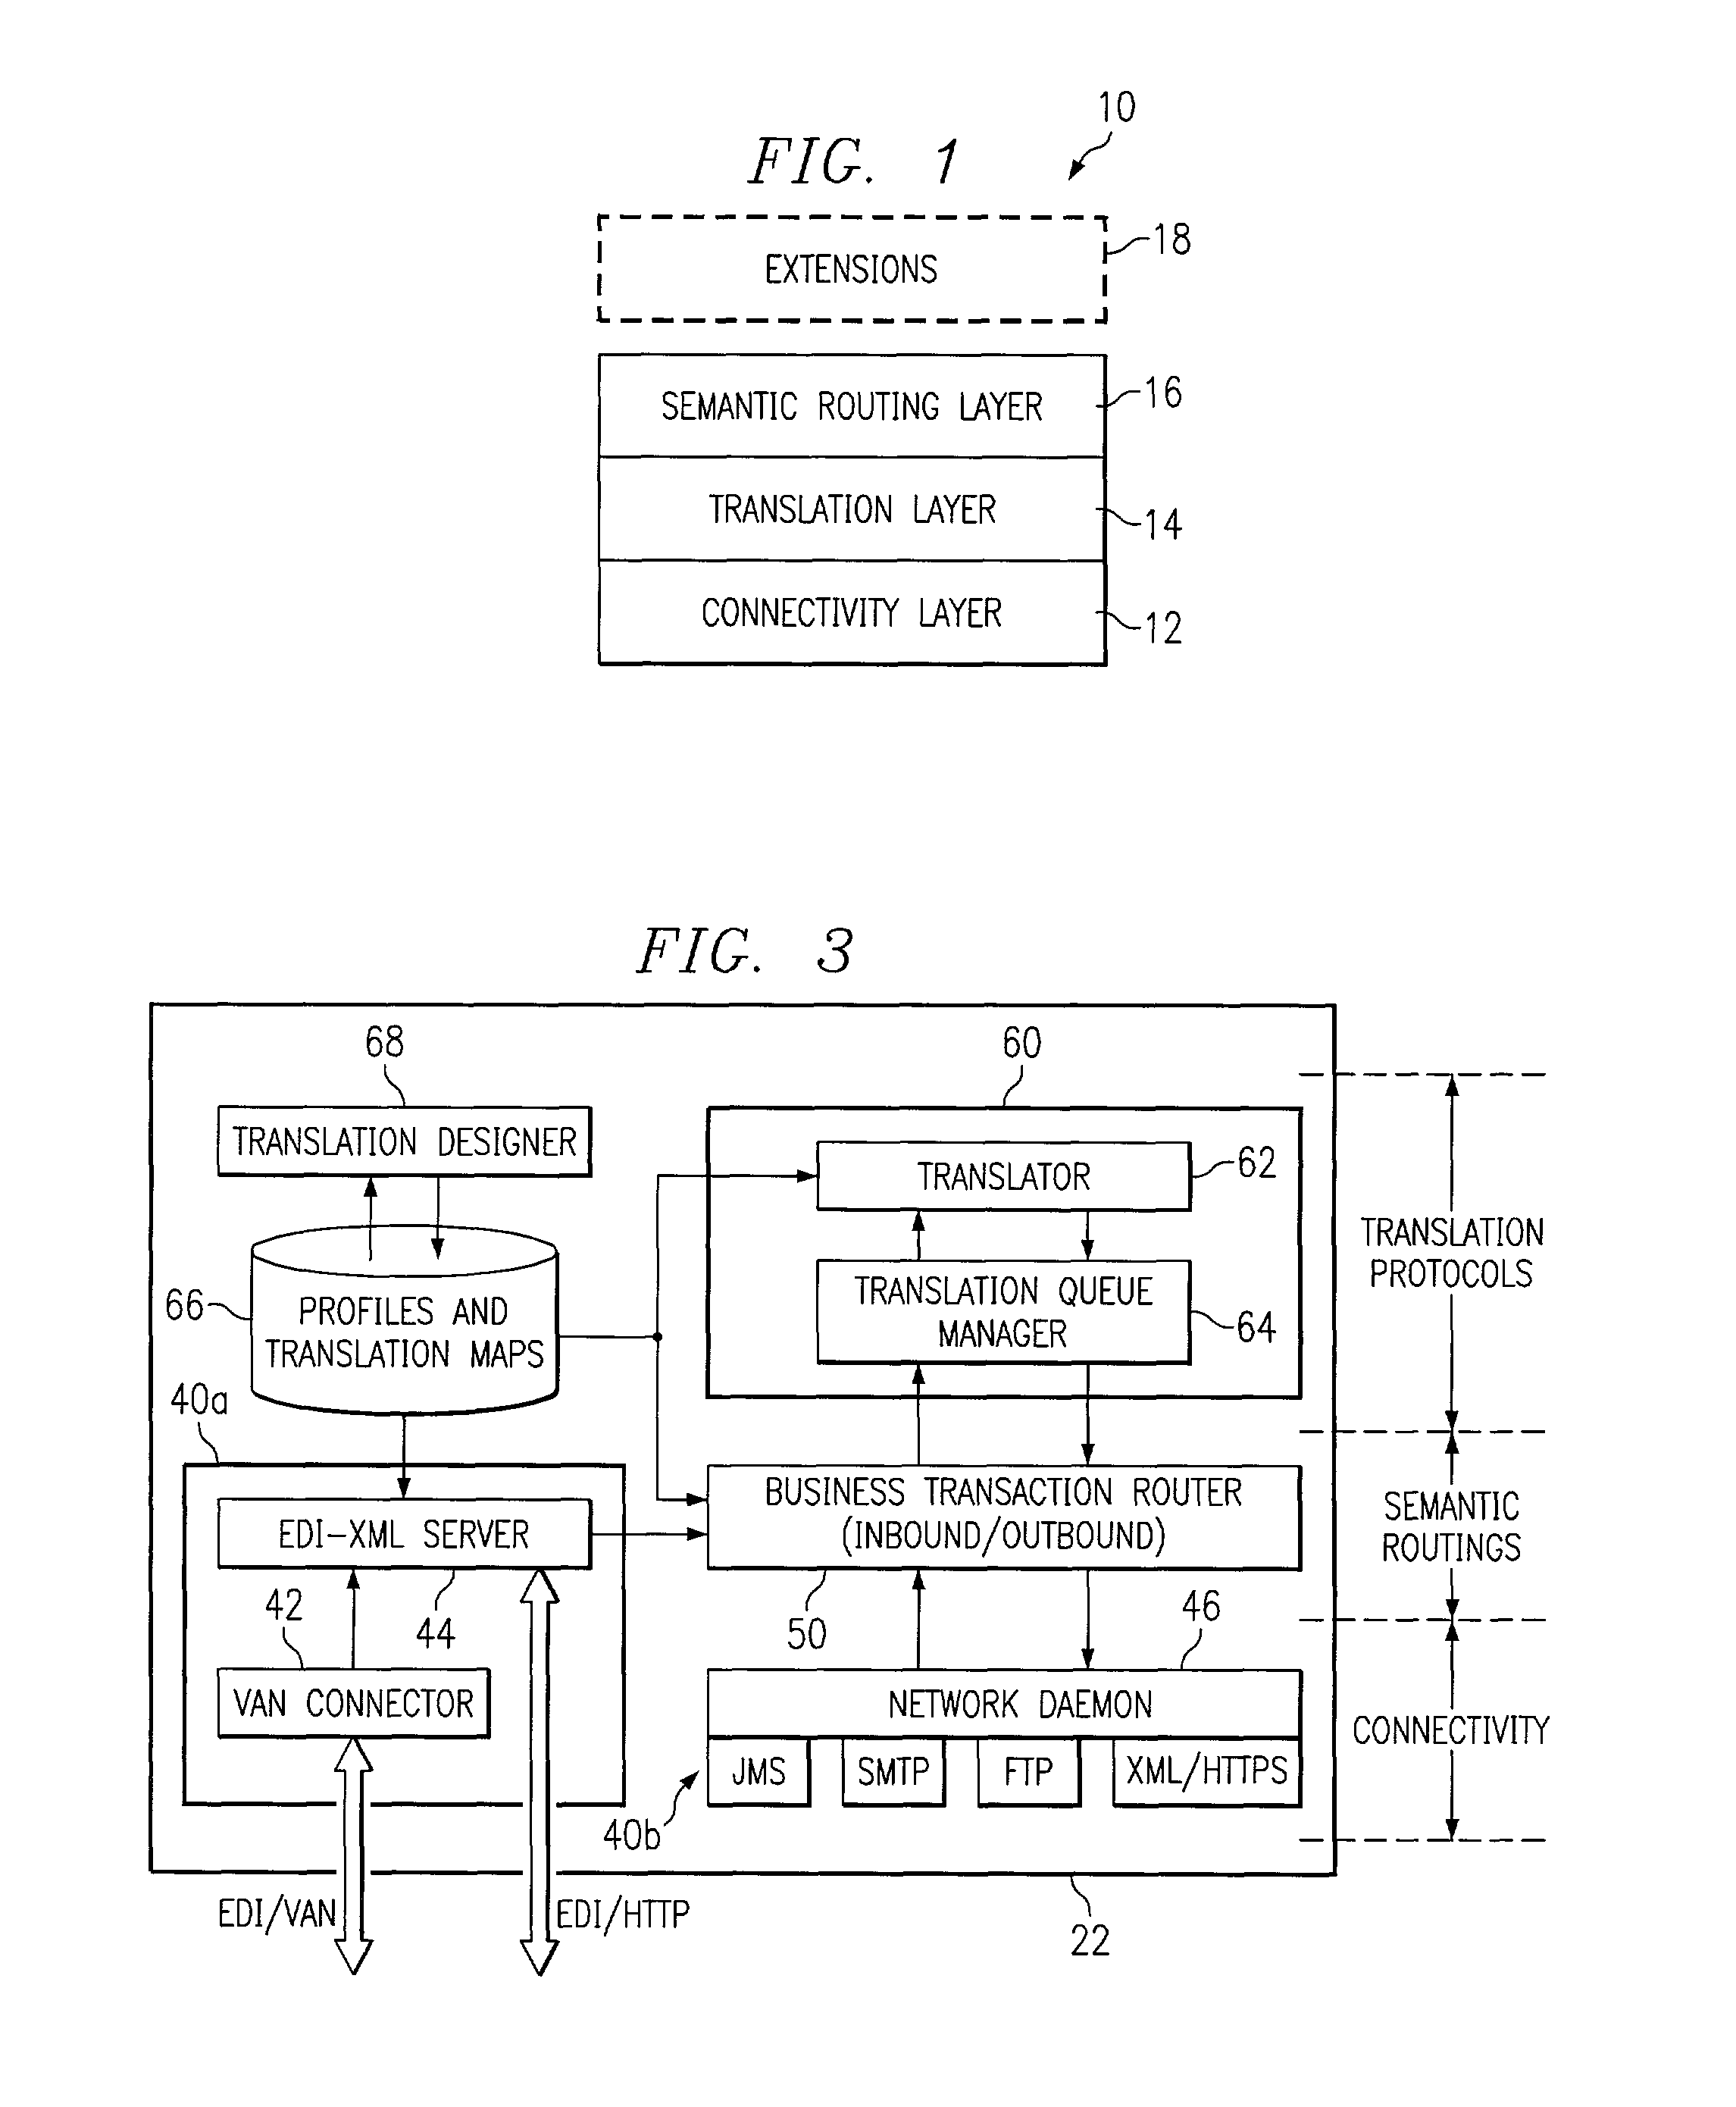 System and method for facilitating communication of data among entities in an electronic trading network